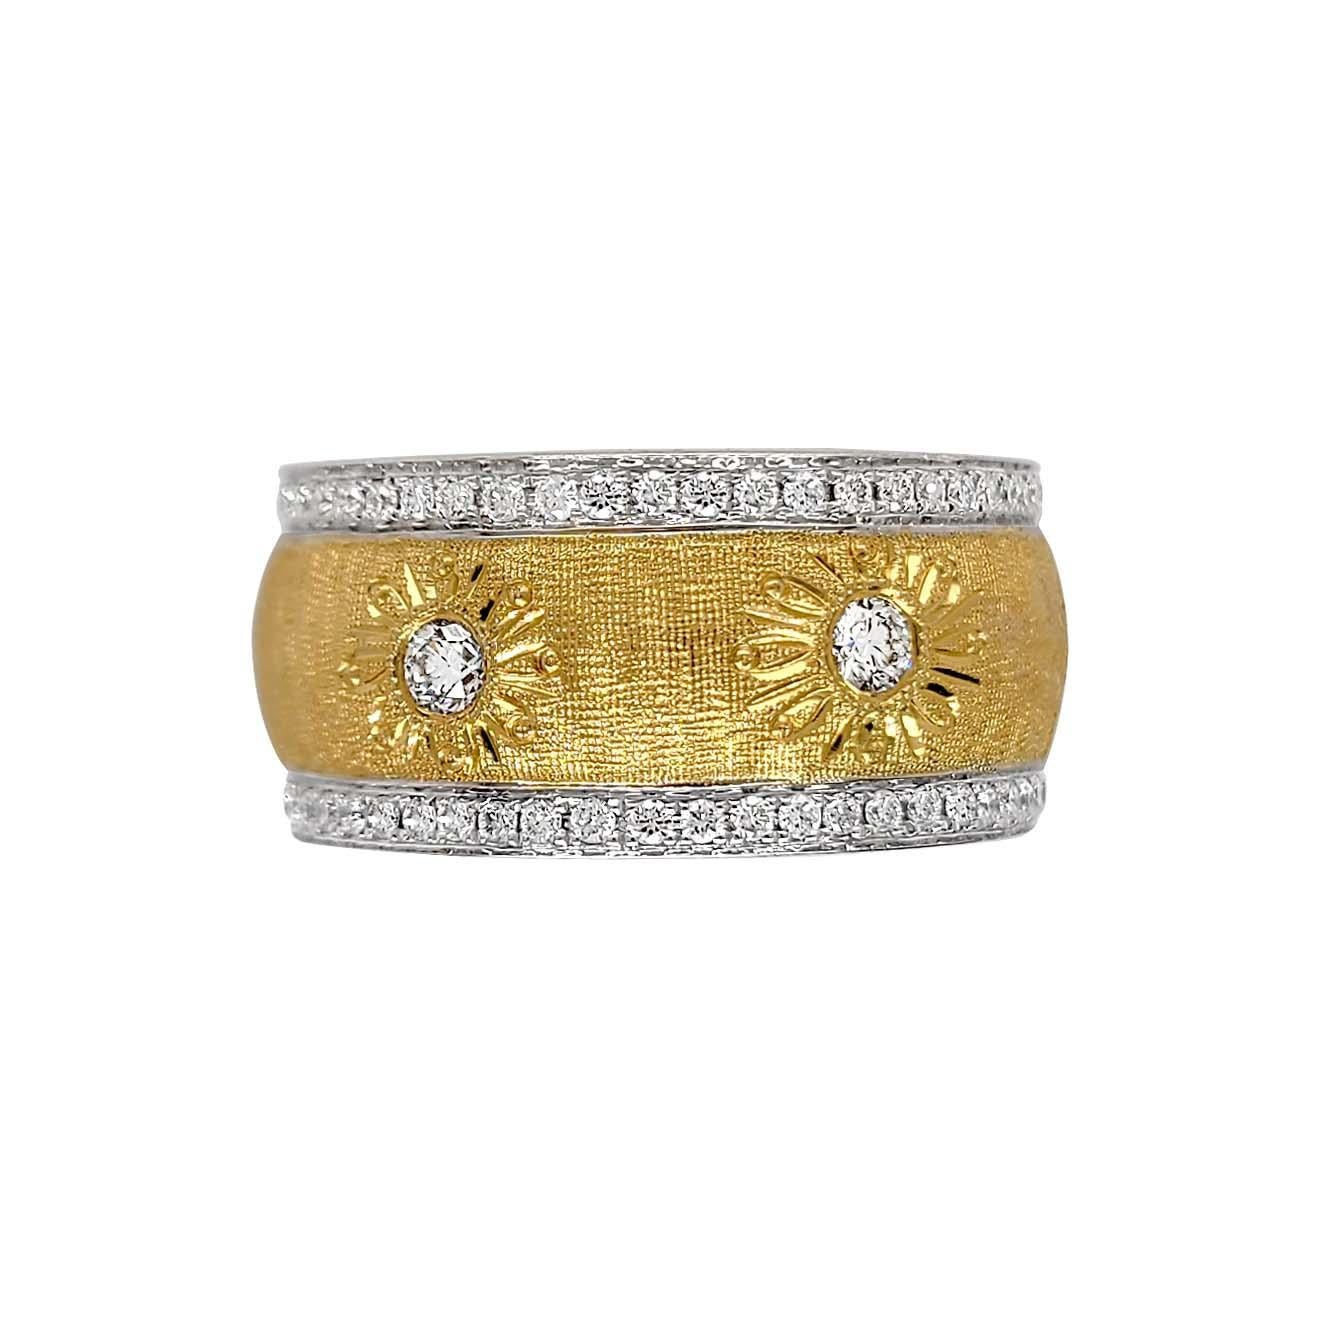 Produced by award winning Italian designer Stefano Vitolo. Stefano creates custom artisanal one of a kind jewelry with excellent gemstones in a truly old world Italian craftmanship.
This handcrafted ring has 0.89 total carat weight of F/G color and